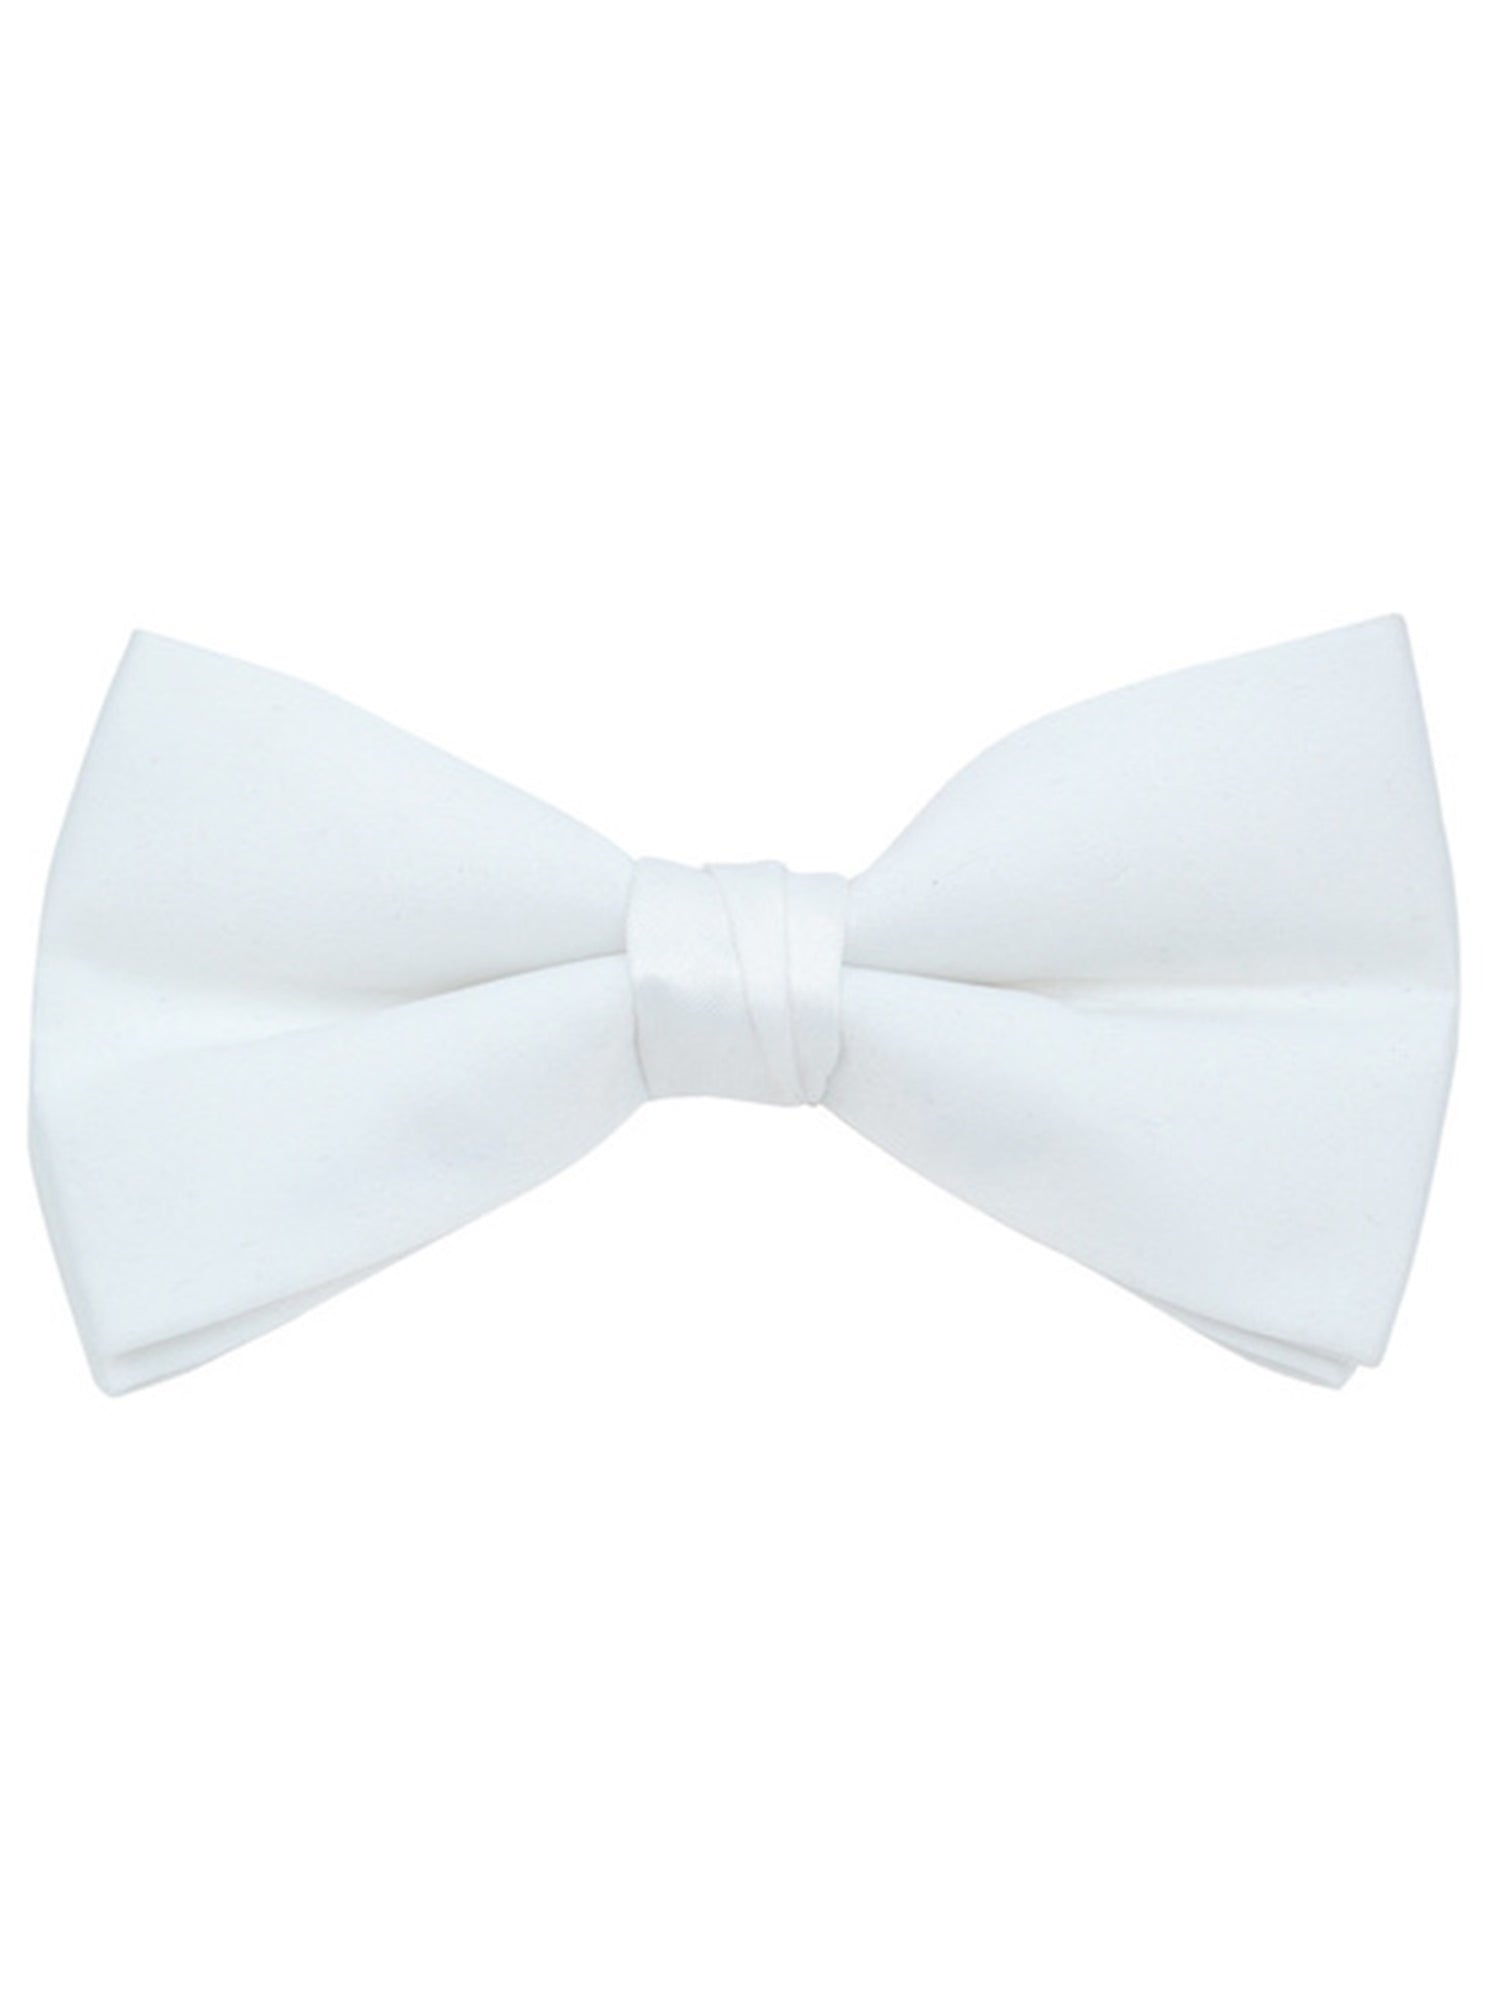 Young Boy's Pre-tied Clip On Bow Tie - Formal Tuxedo Solid Color Boy's Solid Color Bow Tie TheDapperTie White One Size 